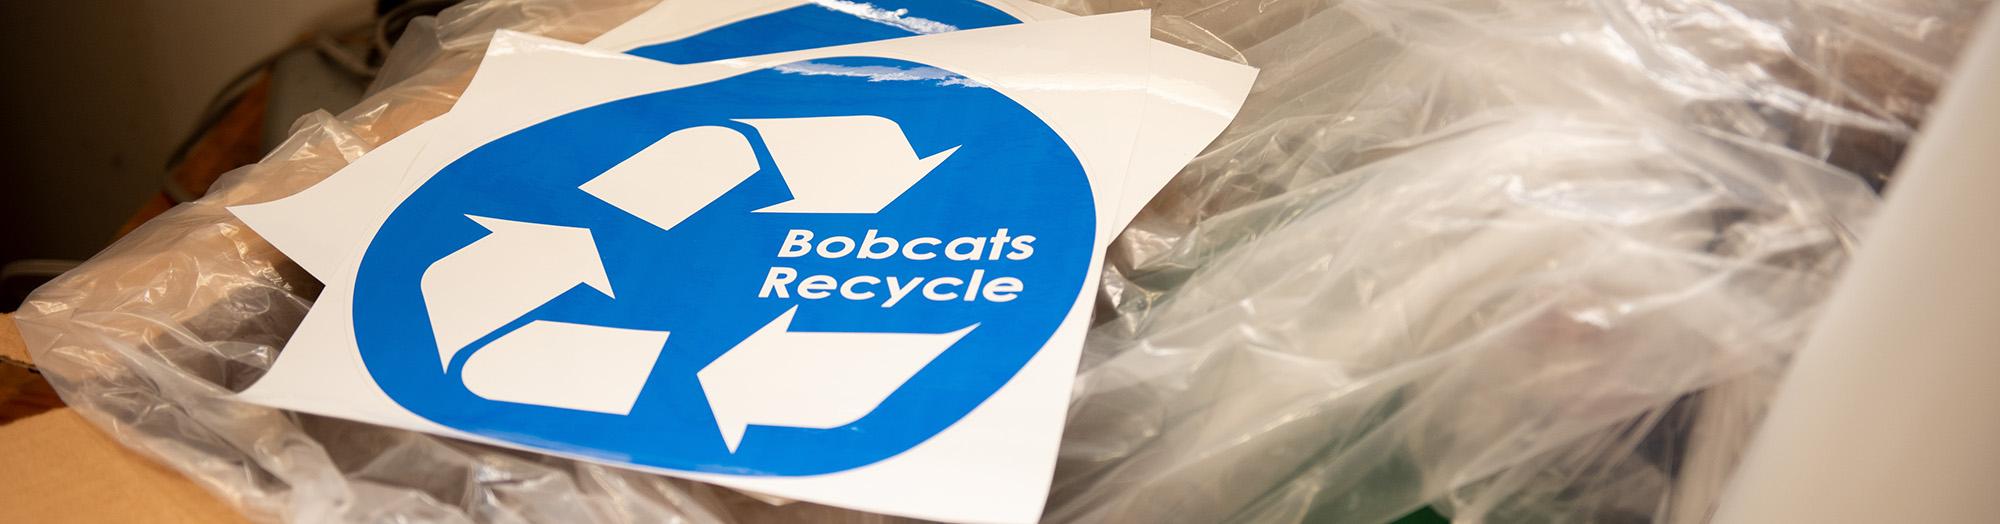 A sign that says "Bobcats Recycle" is seen at the Ohio University recycling center.